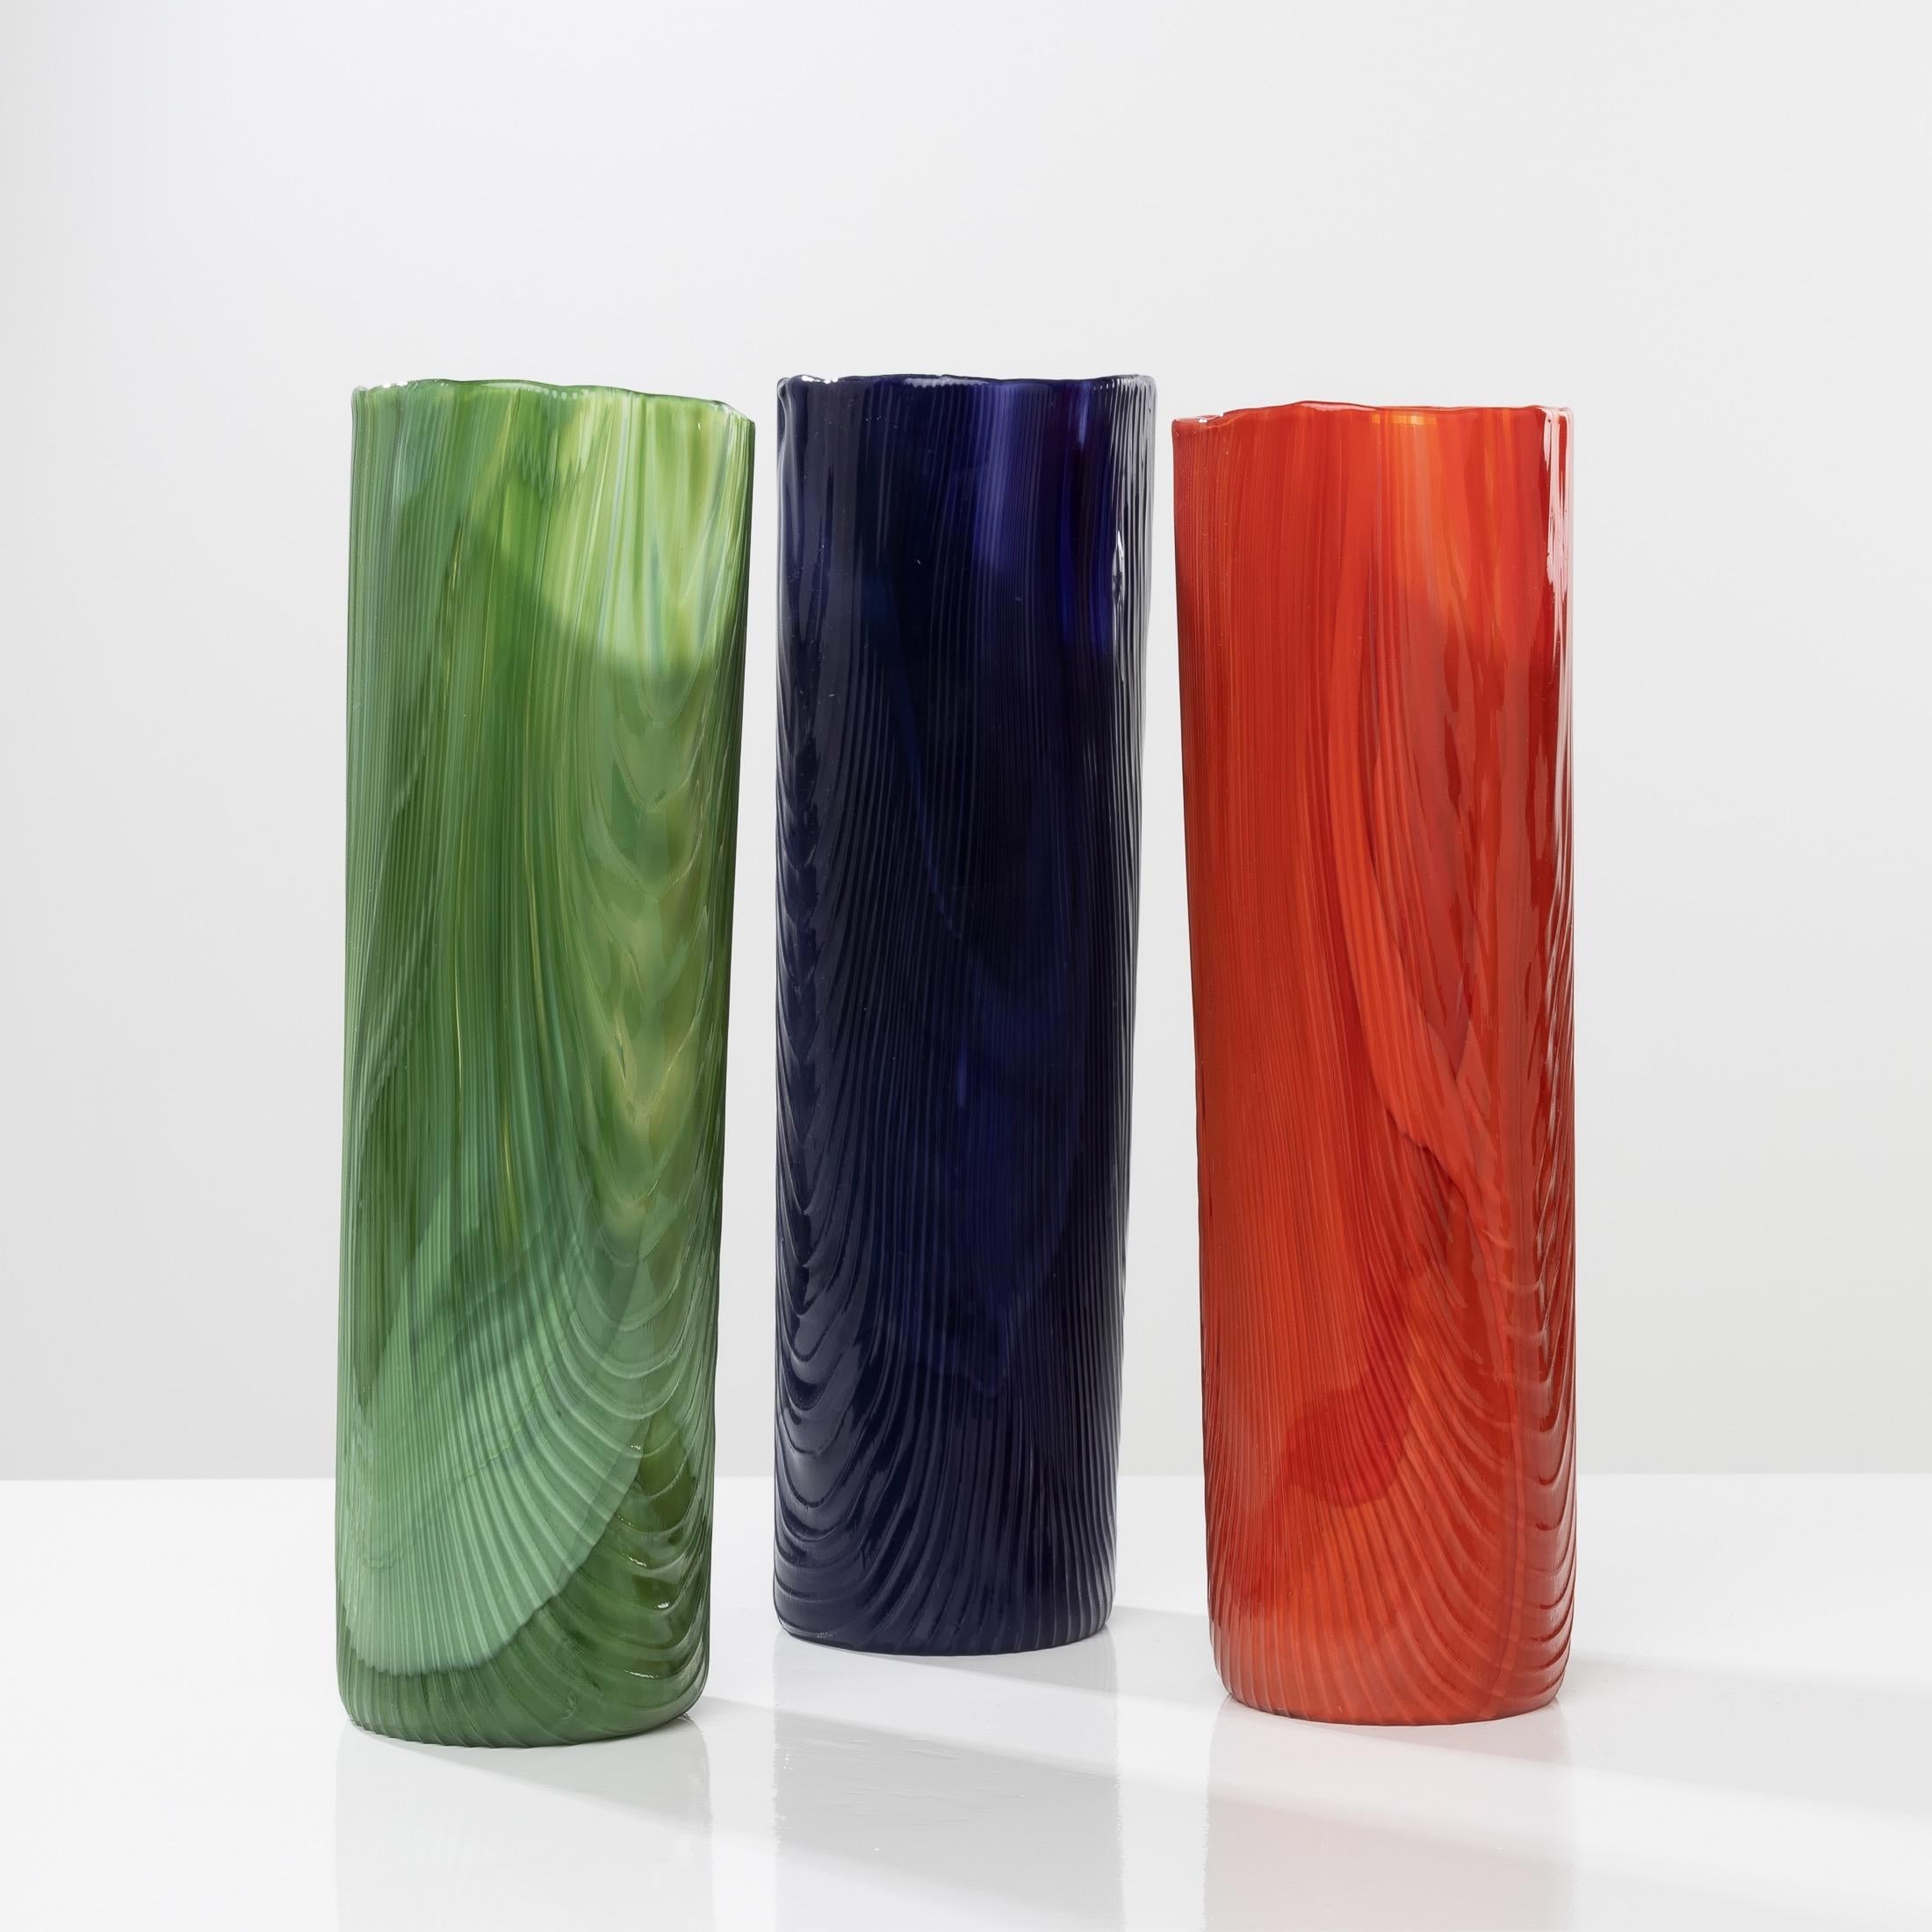 About this set of 3 vases from the 